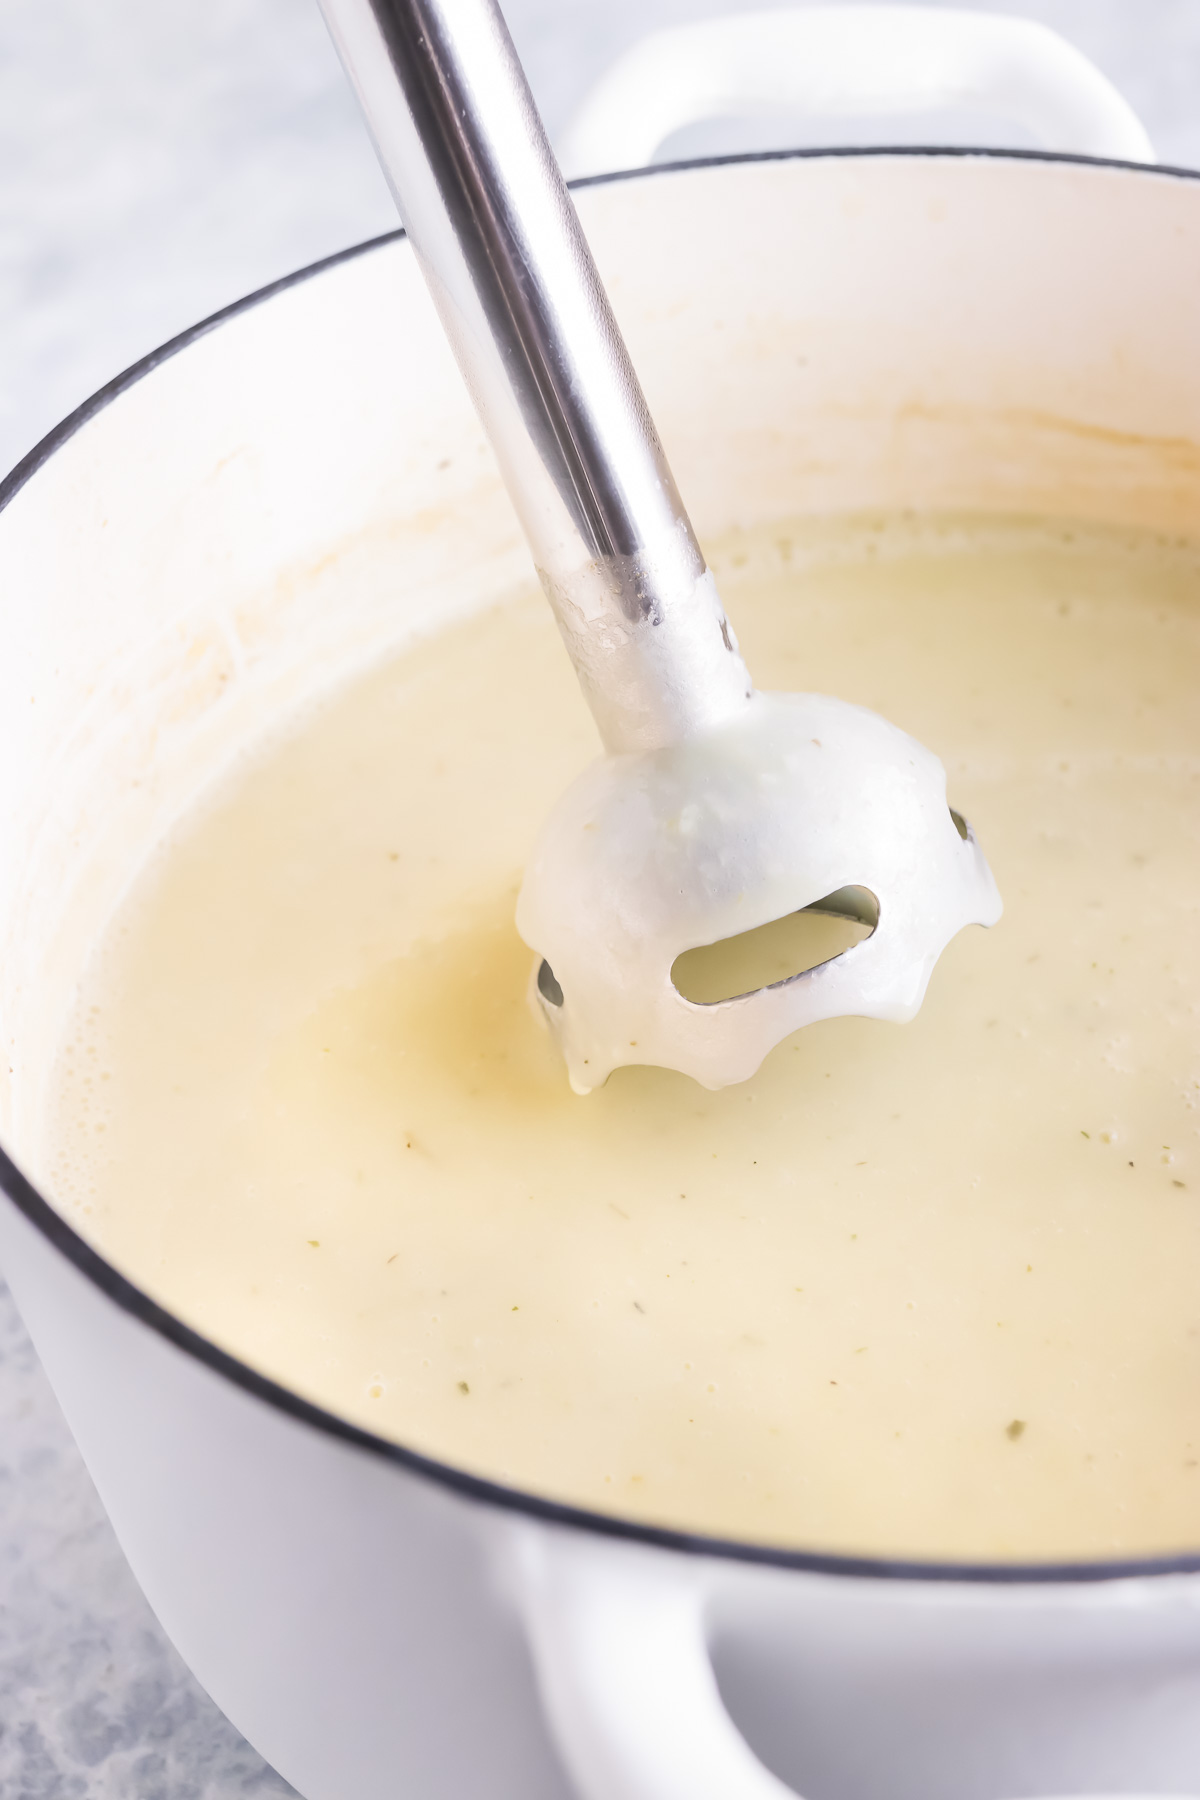 An immersion blender coming out of a large pot full of a creamy potato soup that was just blended up.